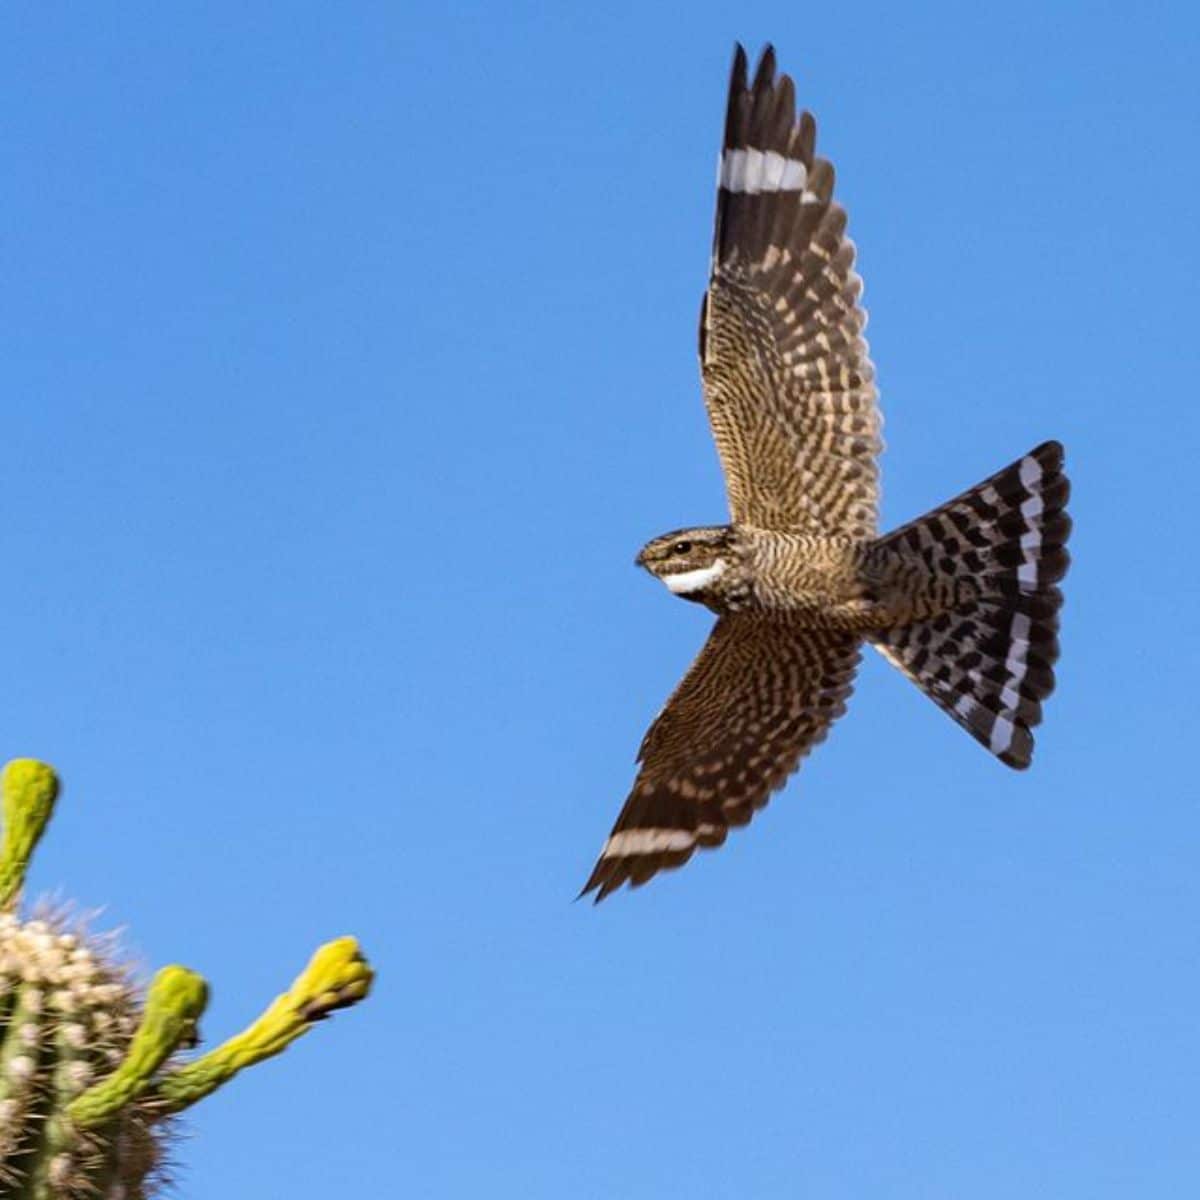 A flying Nighthawk over a cacti.